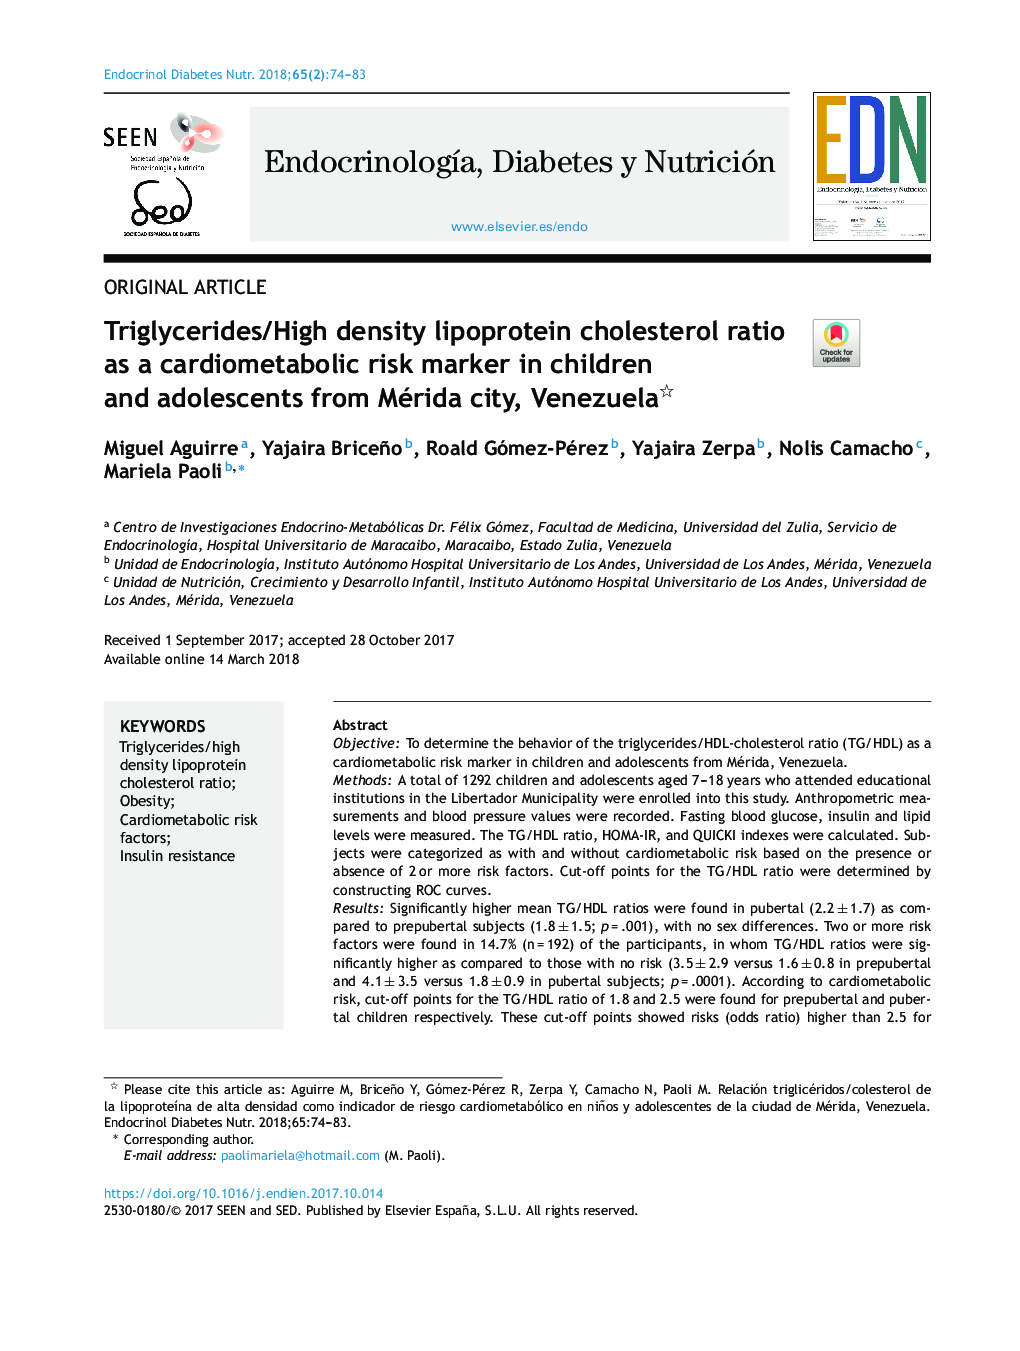 Triglycerides/High density lipoprotein cholesterol ratio as a cardiometabolic risk marker in children and adolescents from Mérida city, Venezuela